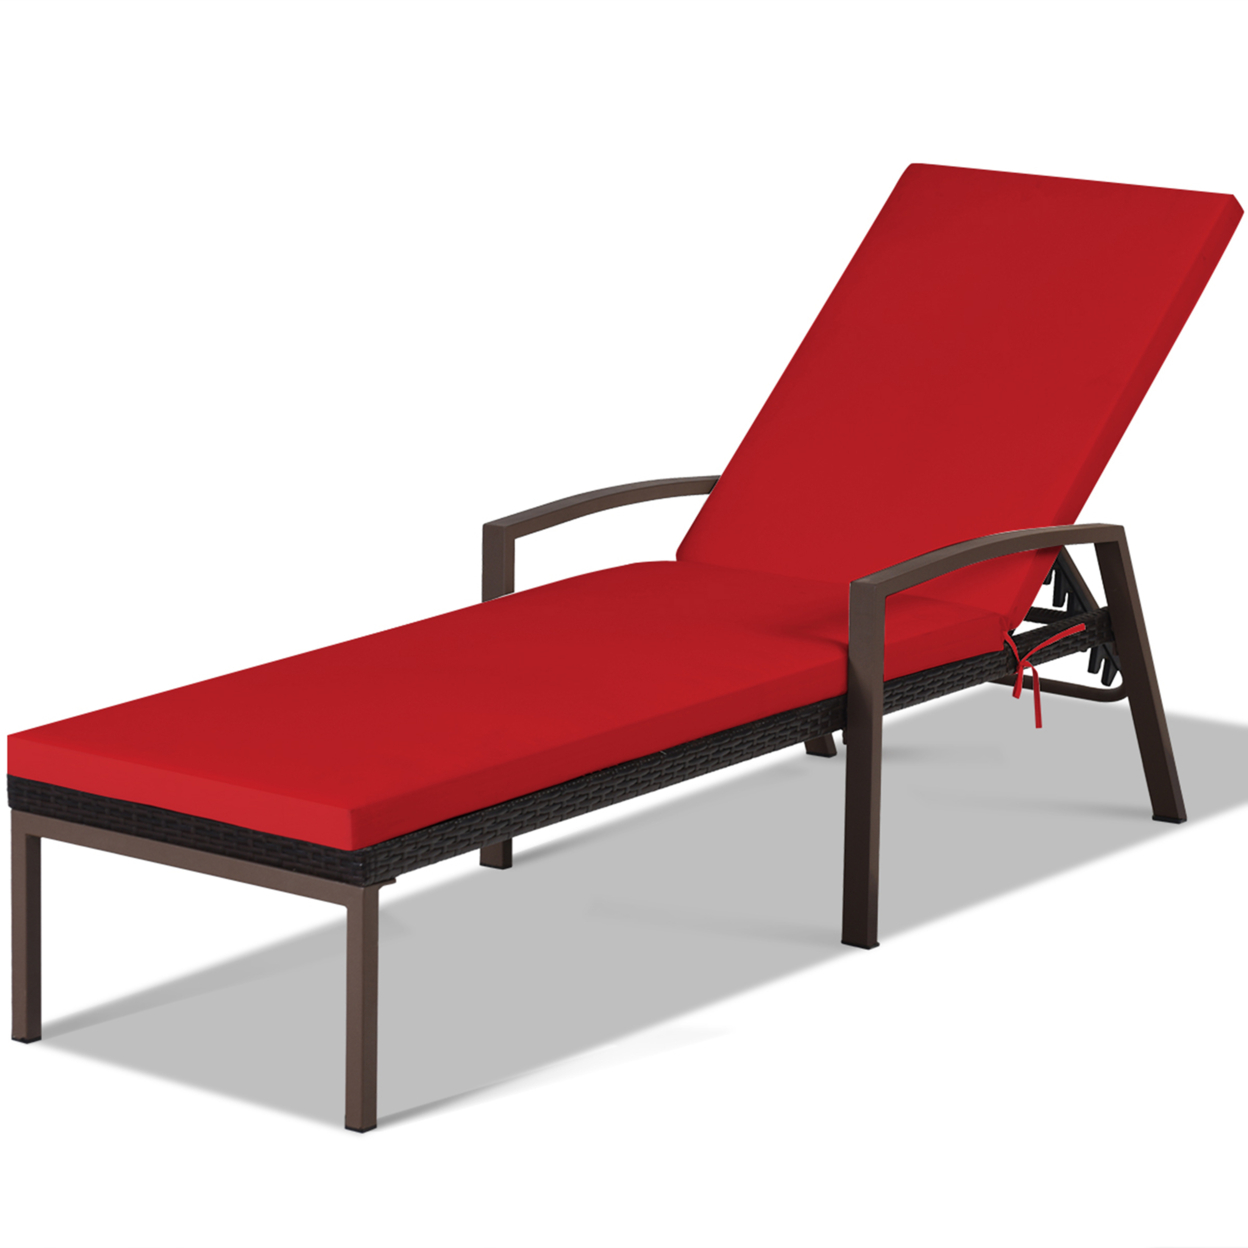 Adjustable Rattan Chaise Recliner Lounge Chair Patio Outdoor W/ Red Cushion